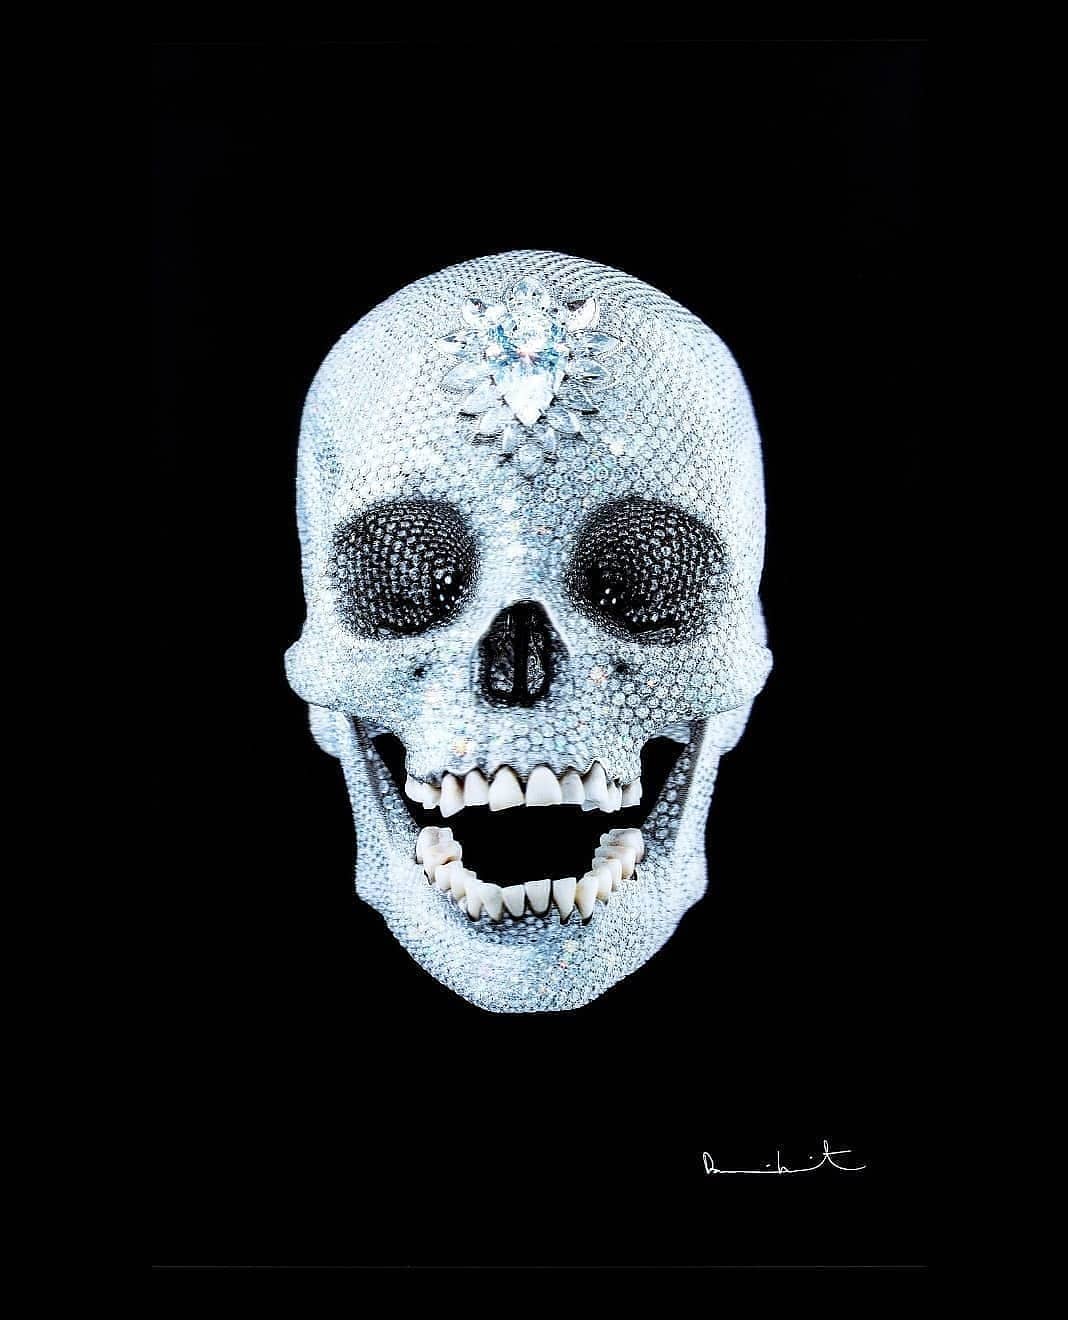 damien hirst for the love of god B1rOB3HHt1y